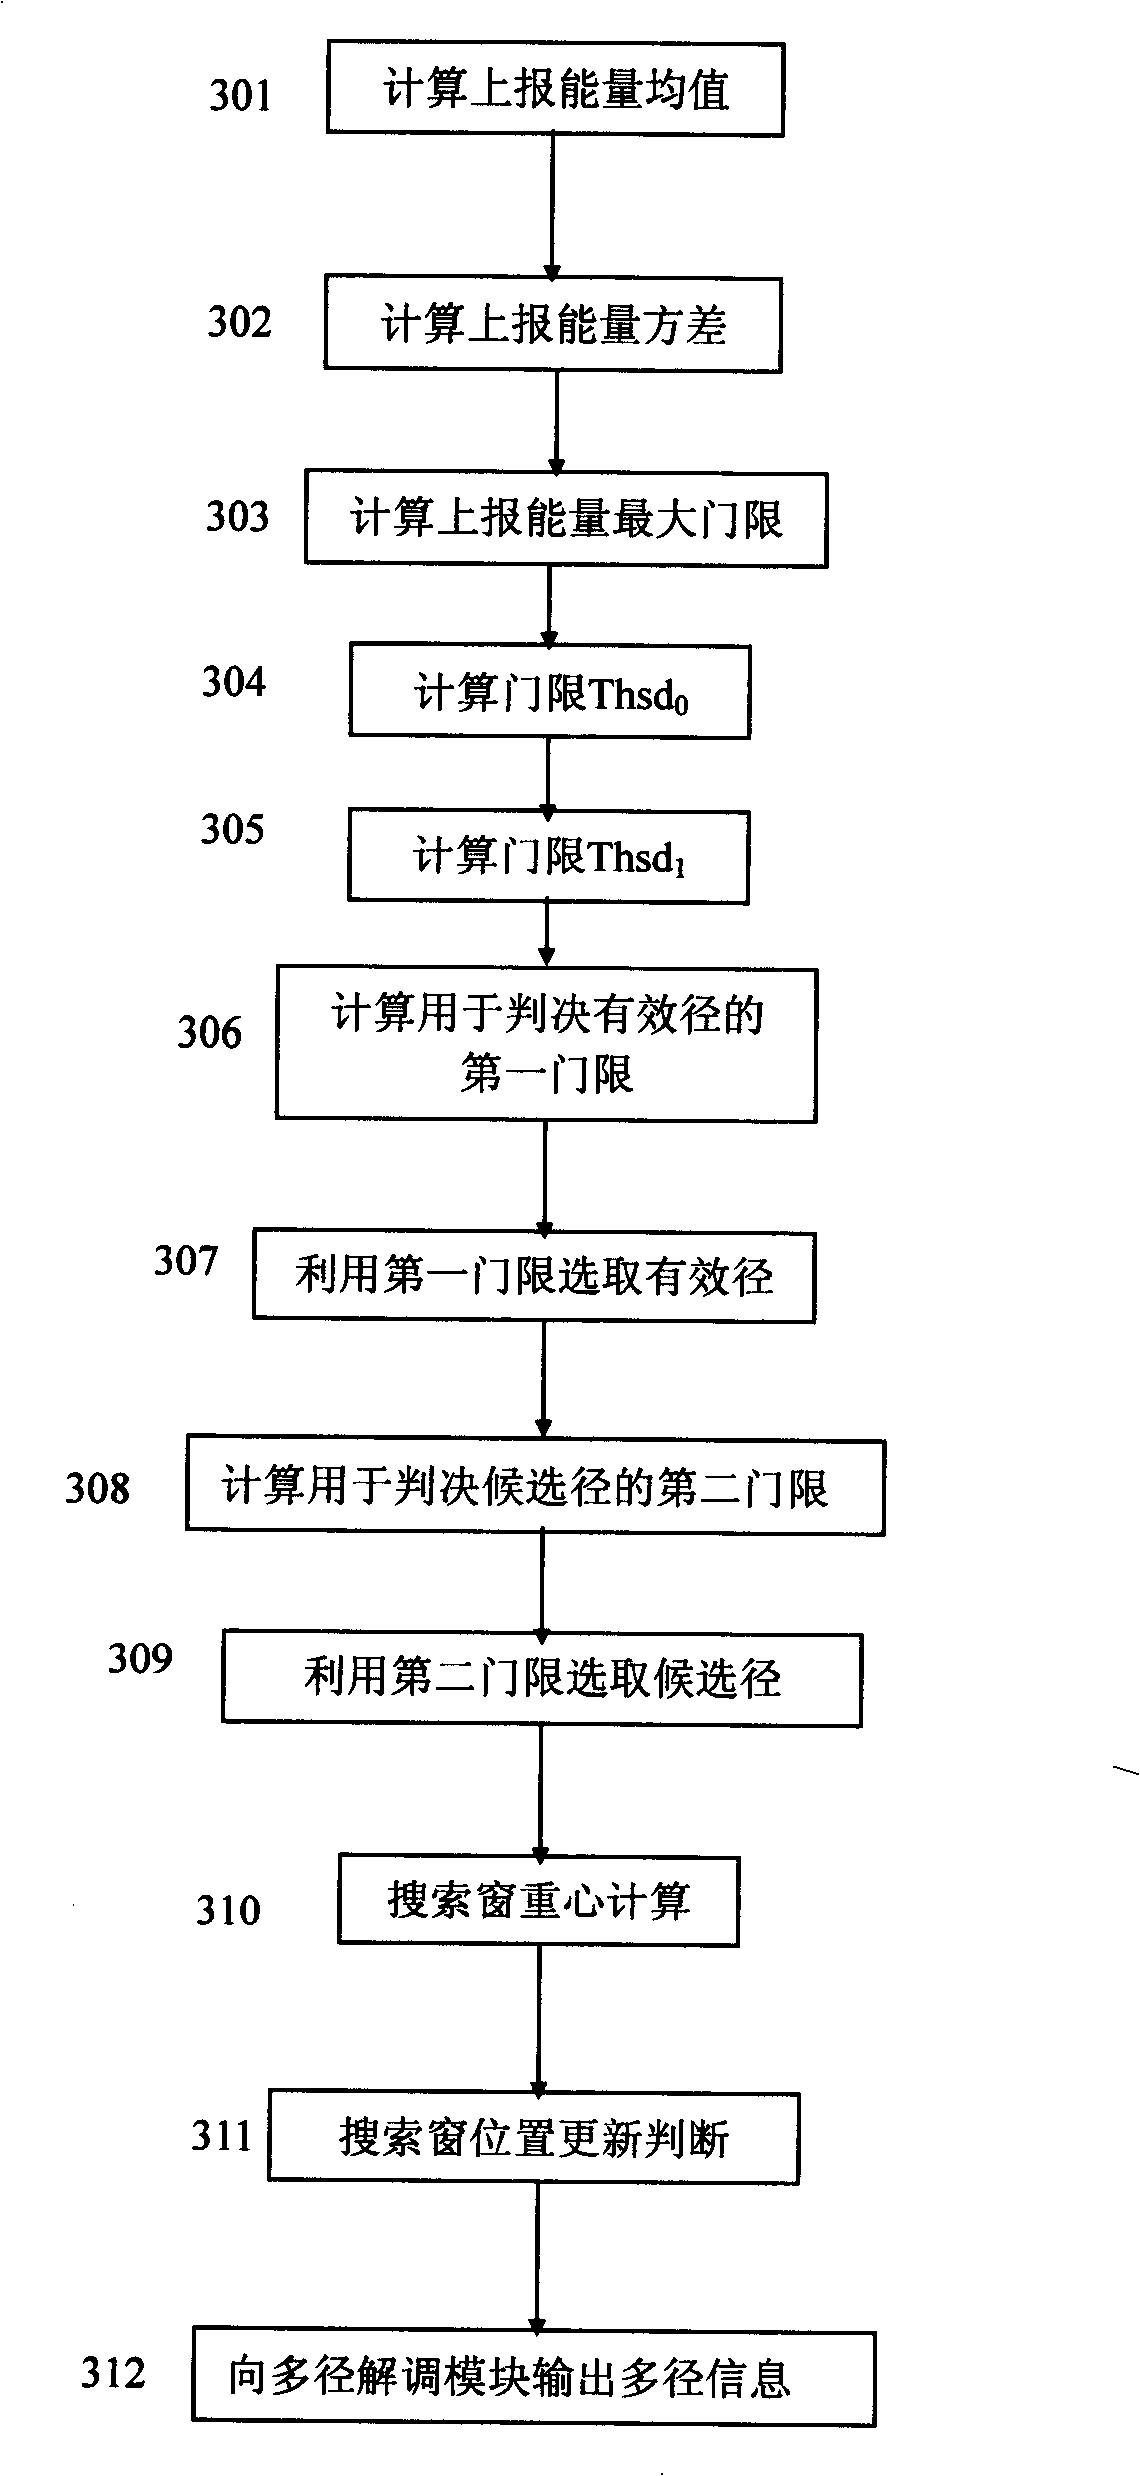 Multipath management method for multipath search